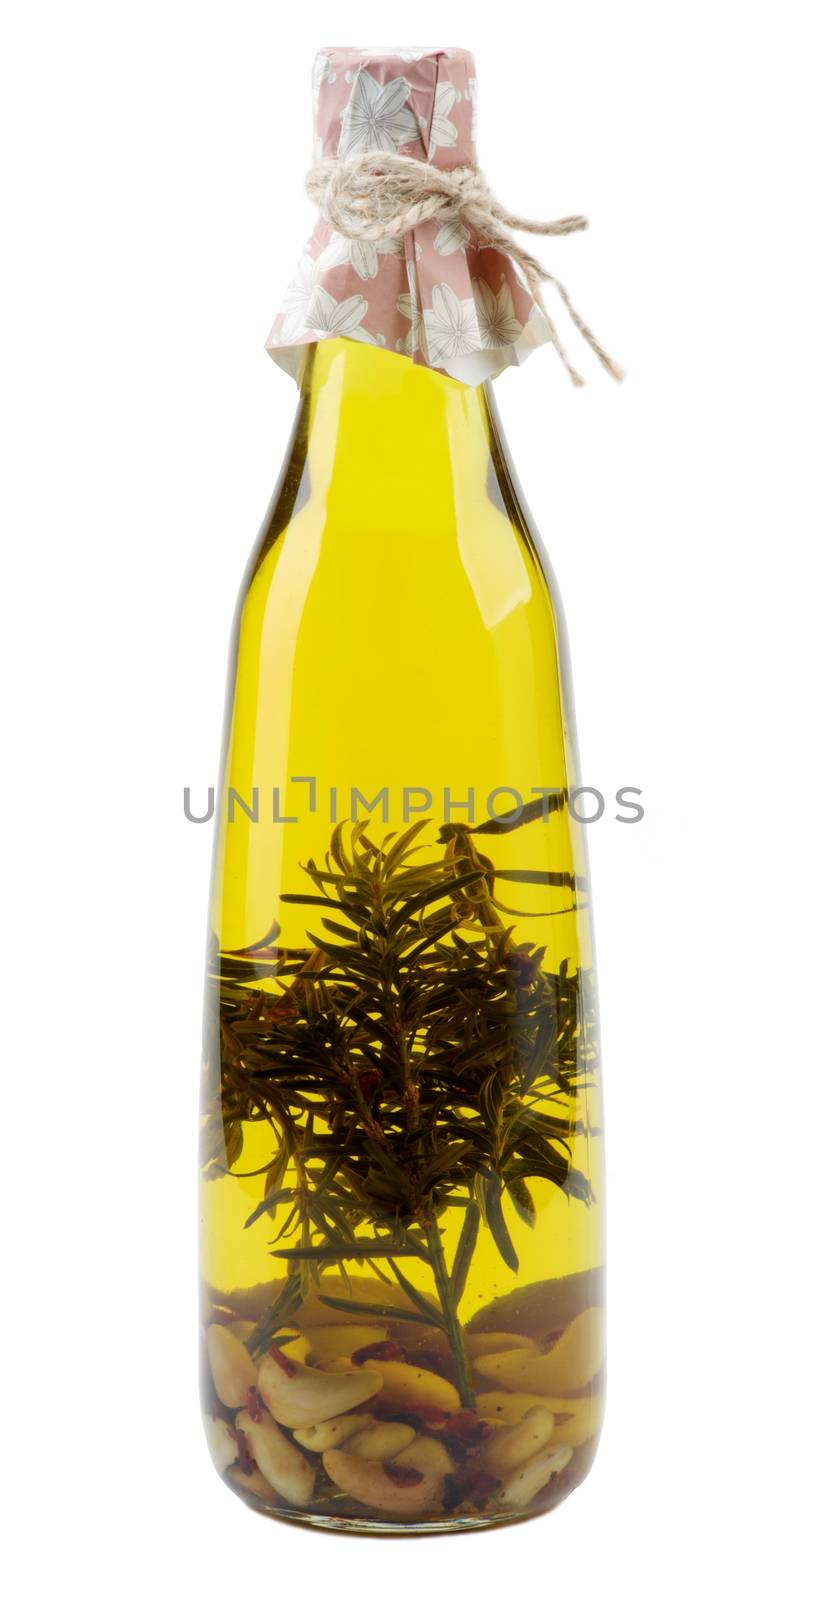 Bottle of Handmade Olive Oil with Rosemary, Spices and Garlic isolated on White background